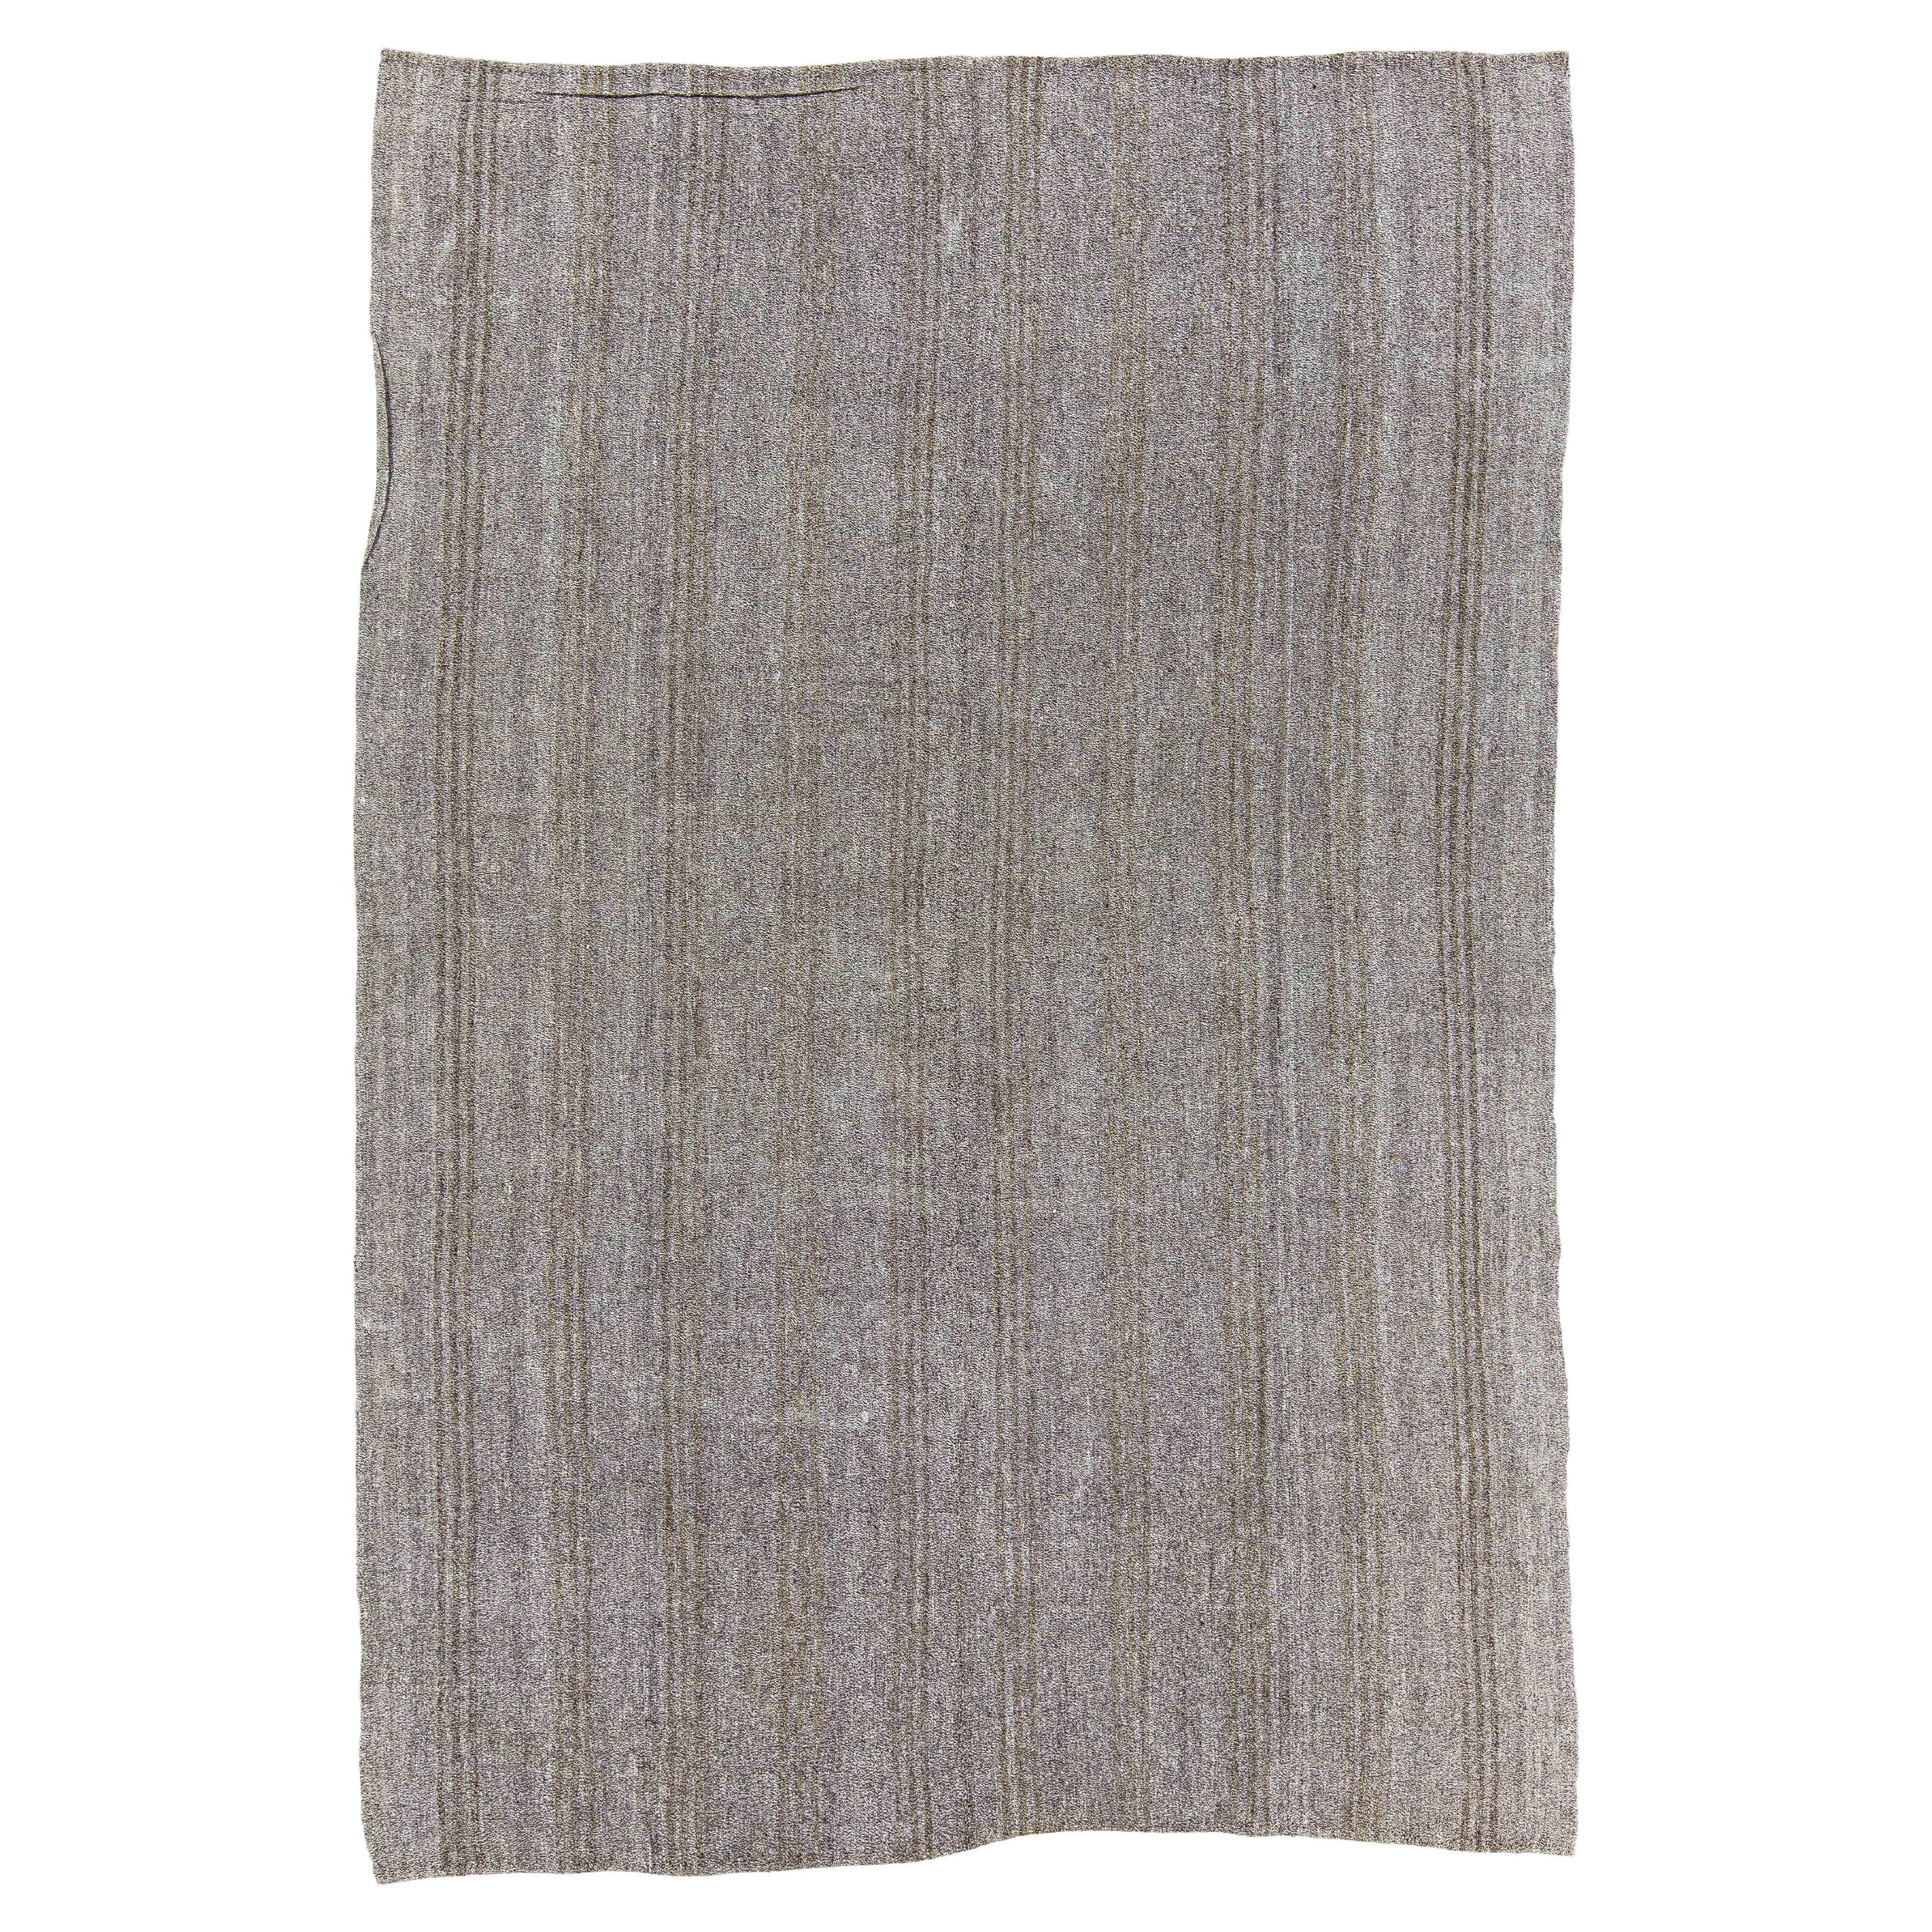 7.8x11.5 Ft Natural Goat Wool and Hemp Turkish Kilim, Light Gray & Brown Rug For Sale